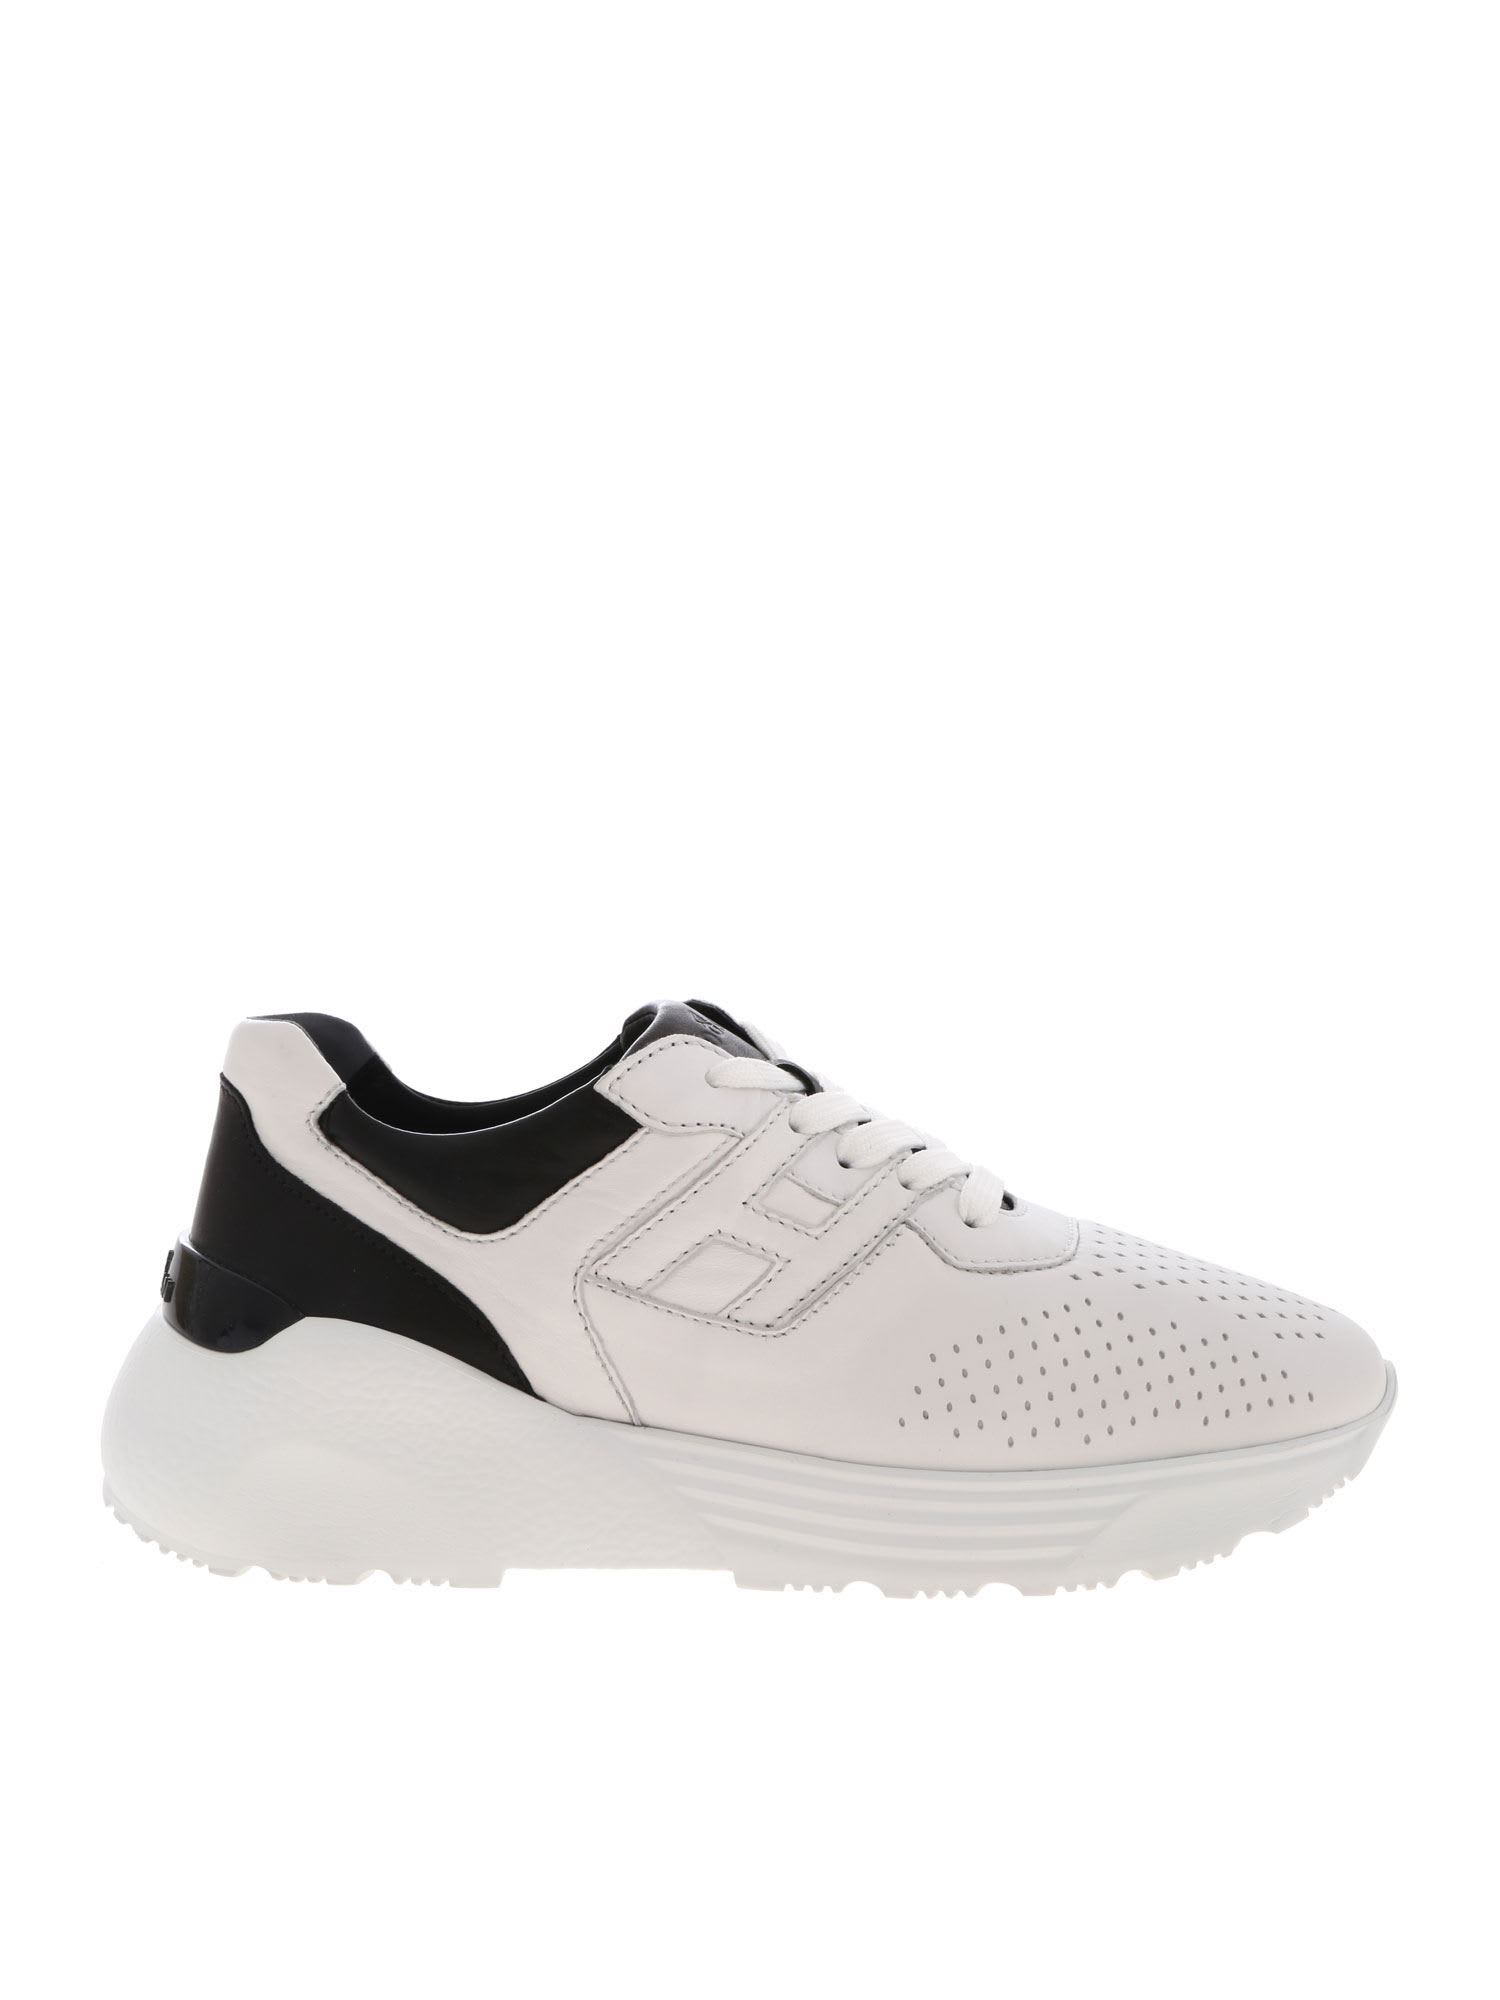 Hogan Sneakers H443 Active In White